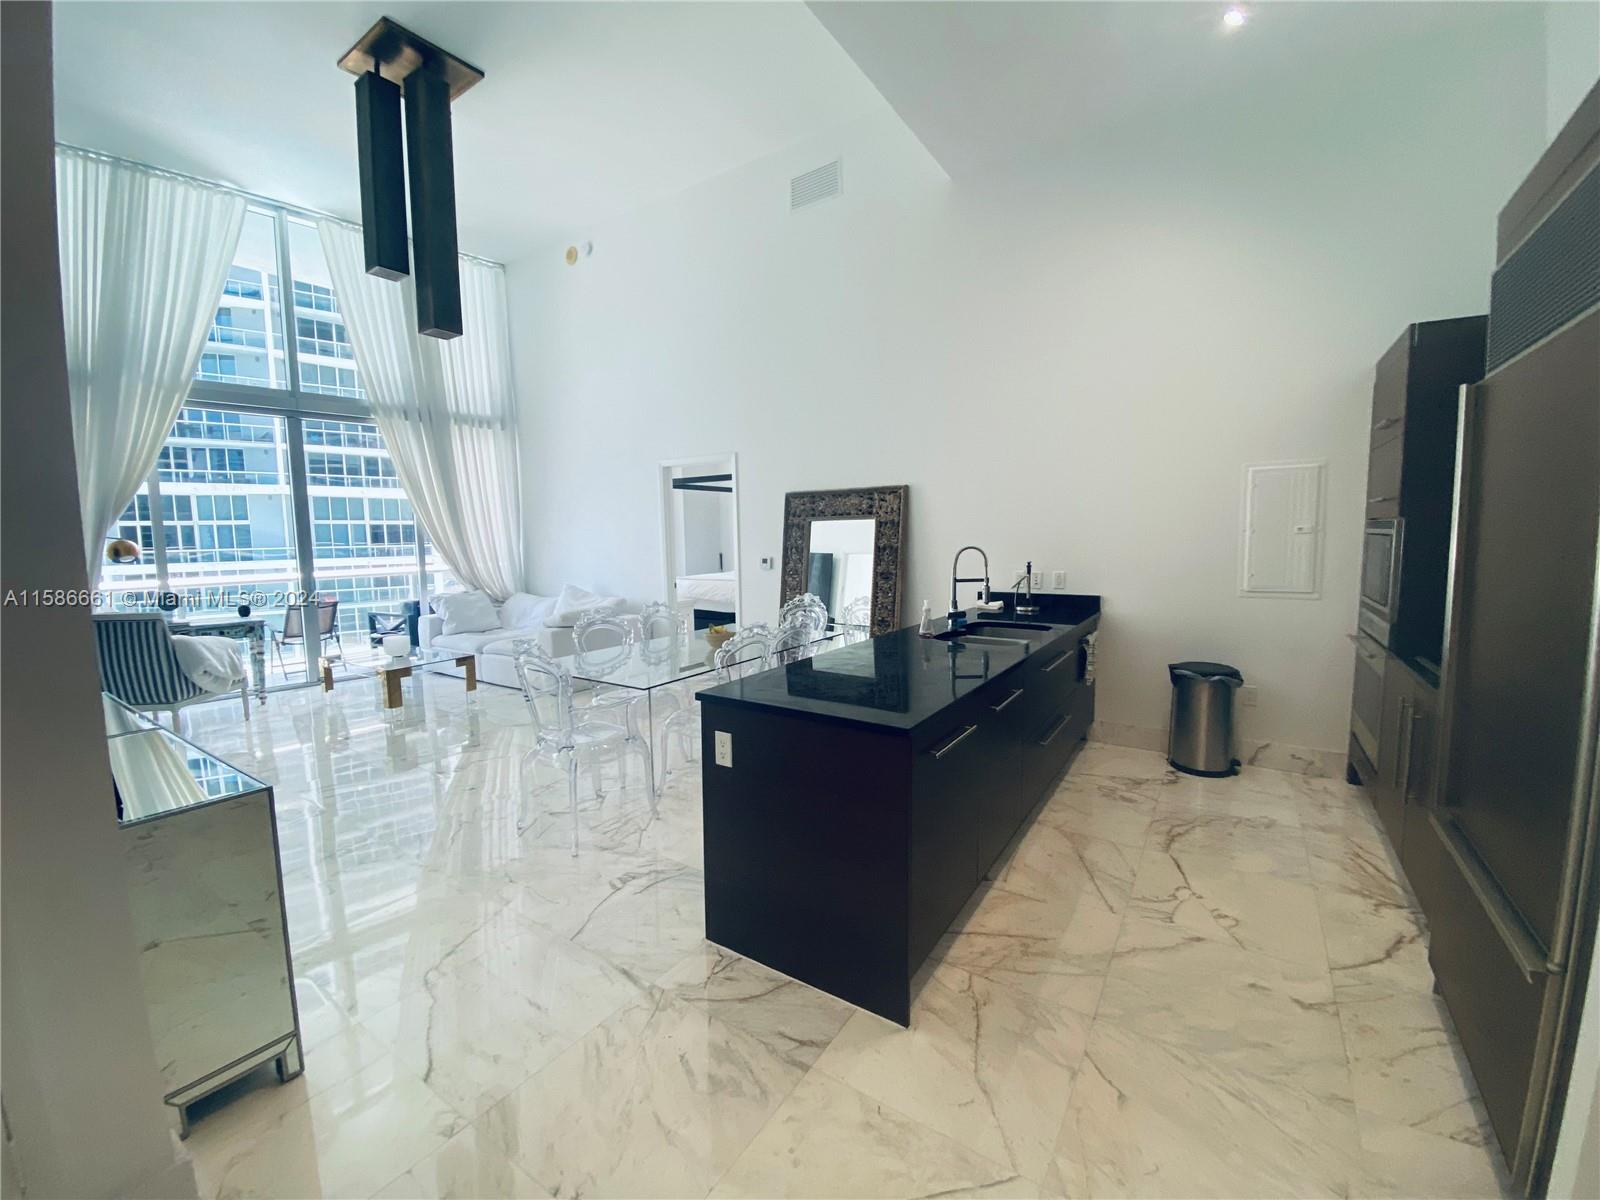 ABSOLUTELY STUNNING 16' CEILINGS 2BR/2BA + DEN... CUSTOM MARBLE FLOORING THROUGHOUT & DESIGNER OVERSIZED LIGHTING FIXTURES.. ENJOY SPECTACULAR VIEWS OVERLOOKING BISCAYNE BAY & THE ICON BRICKELL POOL. SUBZERO & WOLF & BOSCH APPLIANCES. ENJOY 5-STAR AMENITIES OF THE W HOTEL, INCLUDING STATE OF THE ARTS FITNESS CENTER (WORK OUT CLASSES ALL INCLUDED) , INFINITY POOL WITH TOWEL SERVICE, LUXURY SPA TREATMENTS, CIPRIANI'S, CANTINA VIENTE ALL ON PREMISES. WALKING DISTANCE TO BRICKELL CITY CENTER, ENDLESS RESTAURANTS, SHOPPING AND THE MIAMI FINANCIAL DISTRICT.